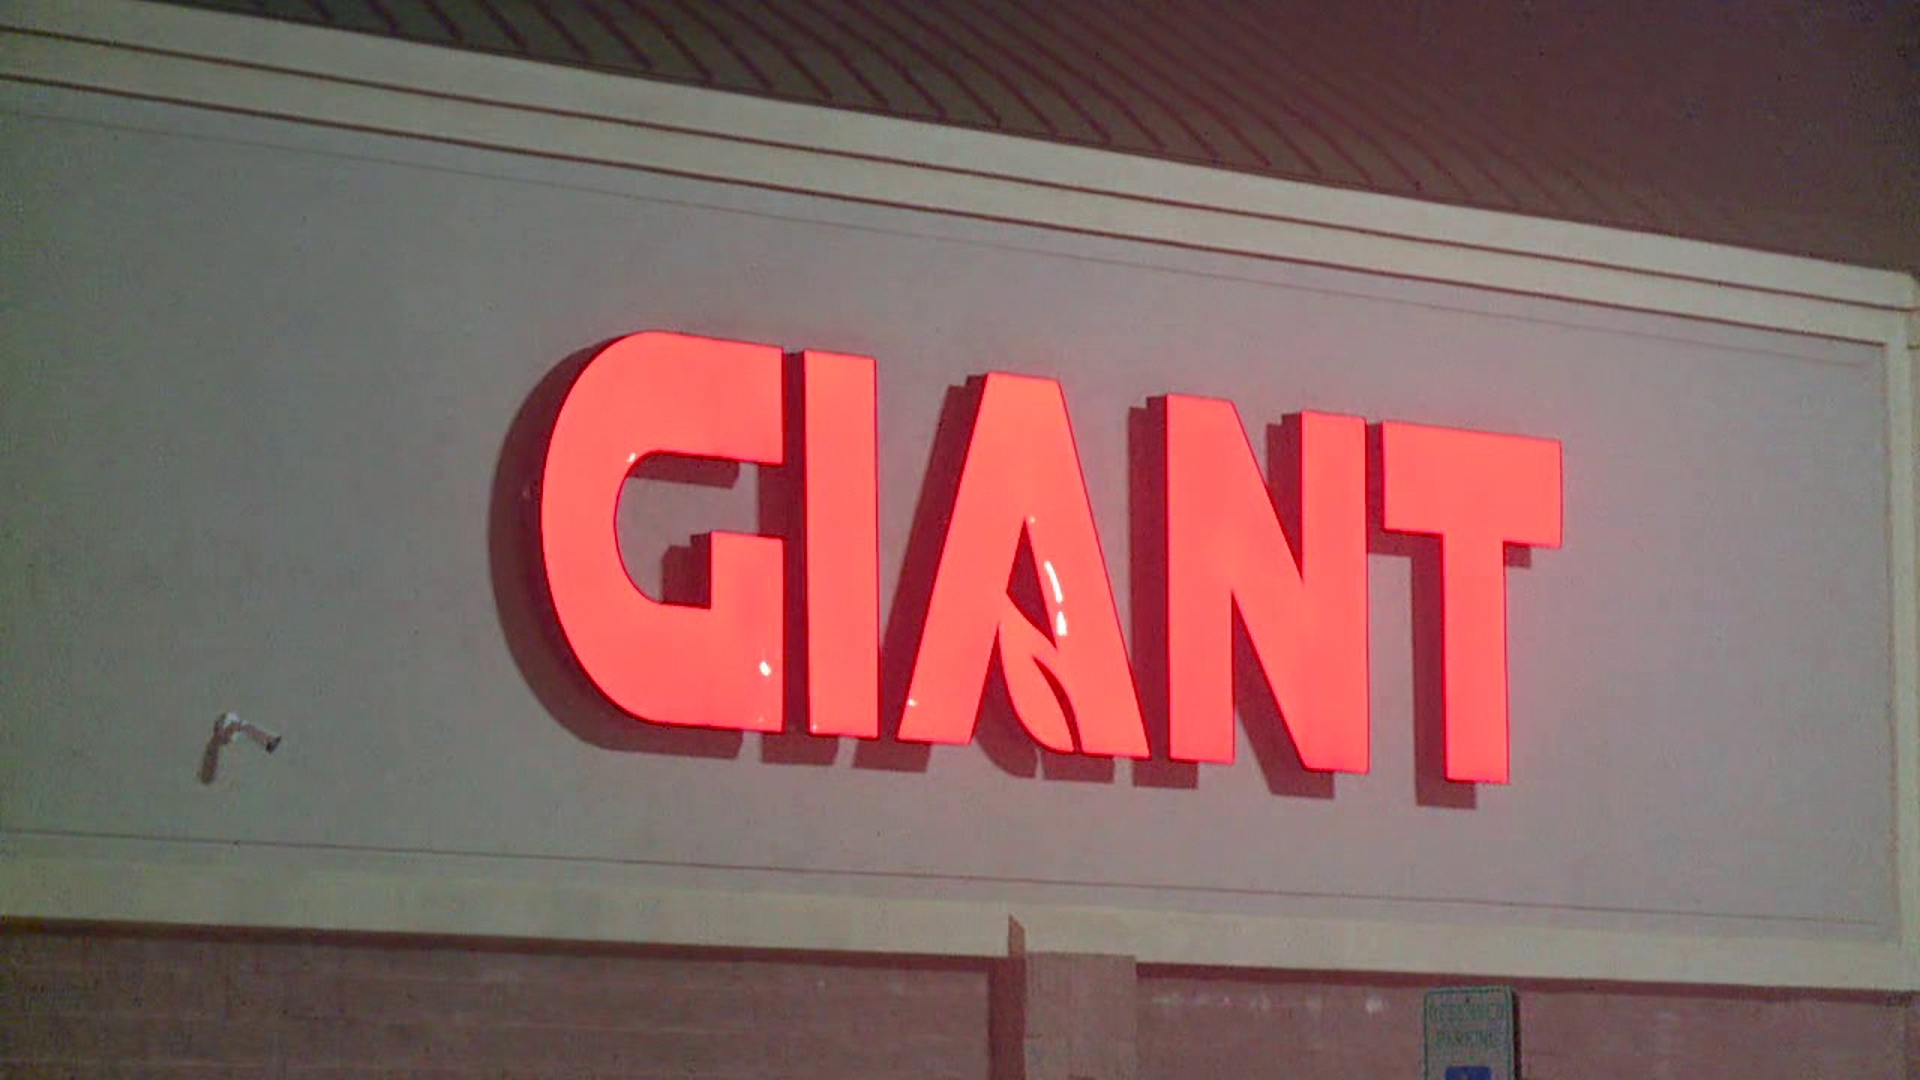 After a fire damaged Giant in Scranton, busses will now take shoppers to nearby Dickson City location for free.